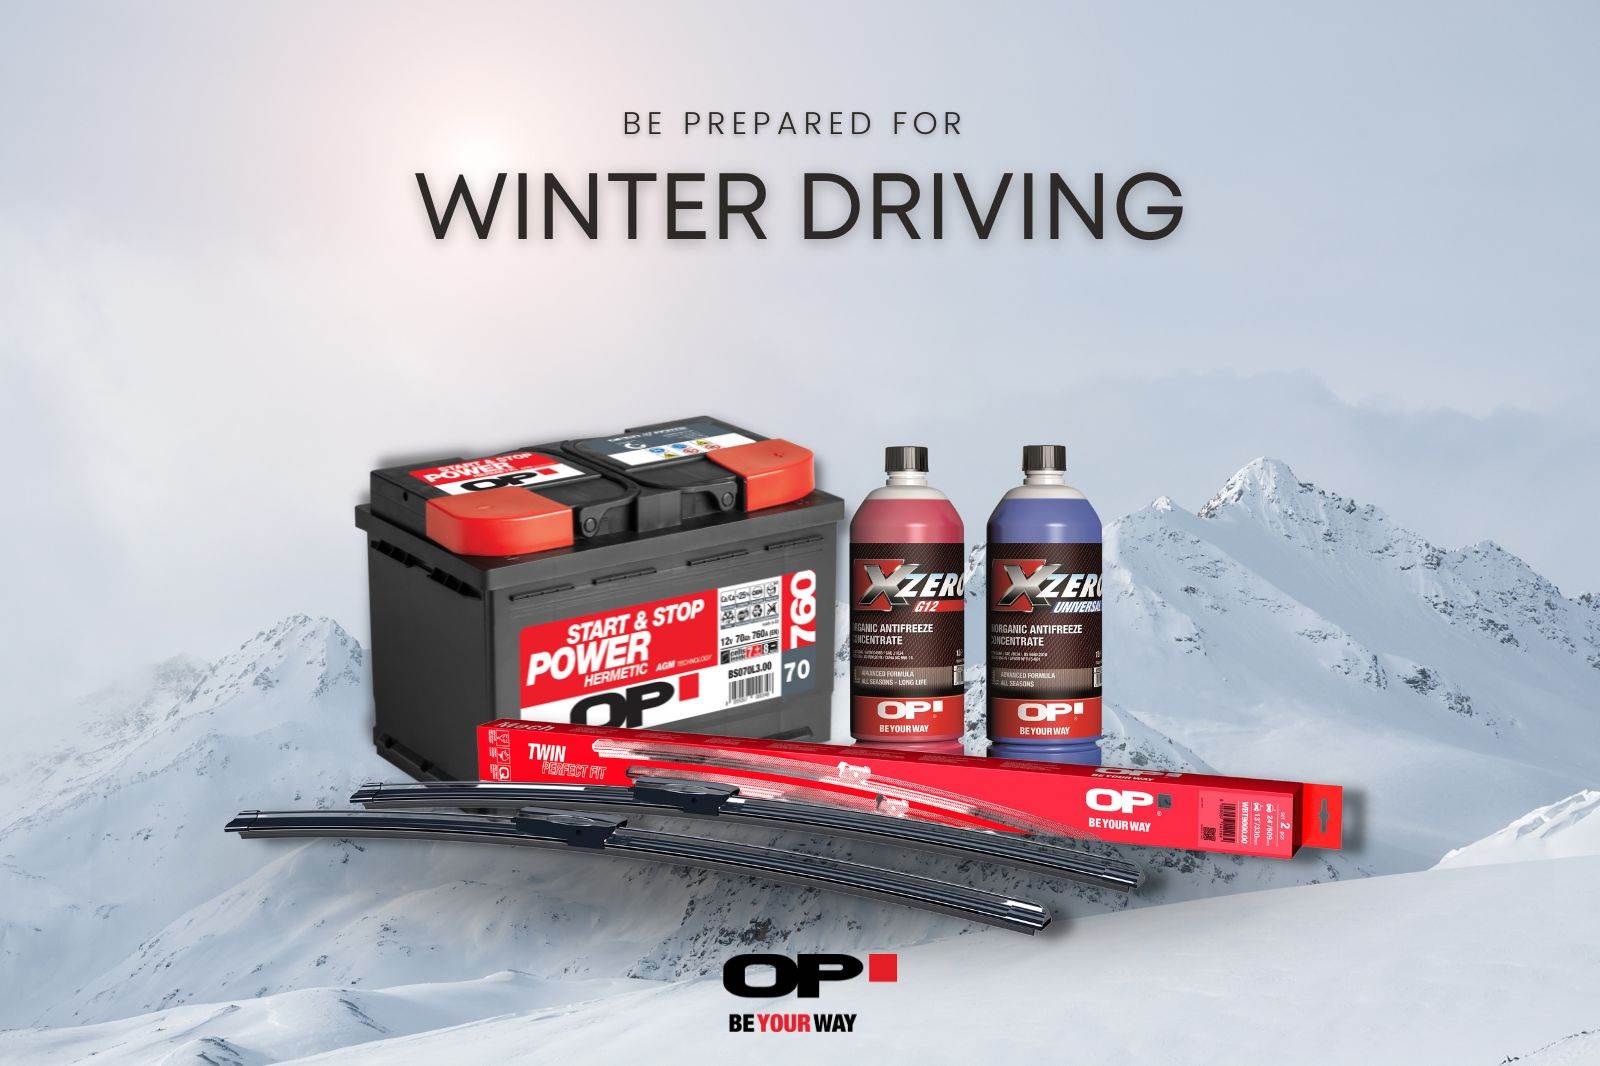 Be prepared for Winter Driving